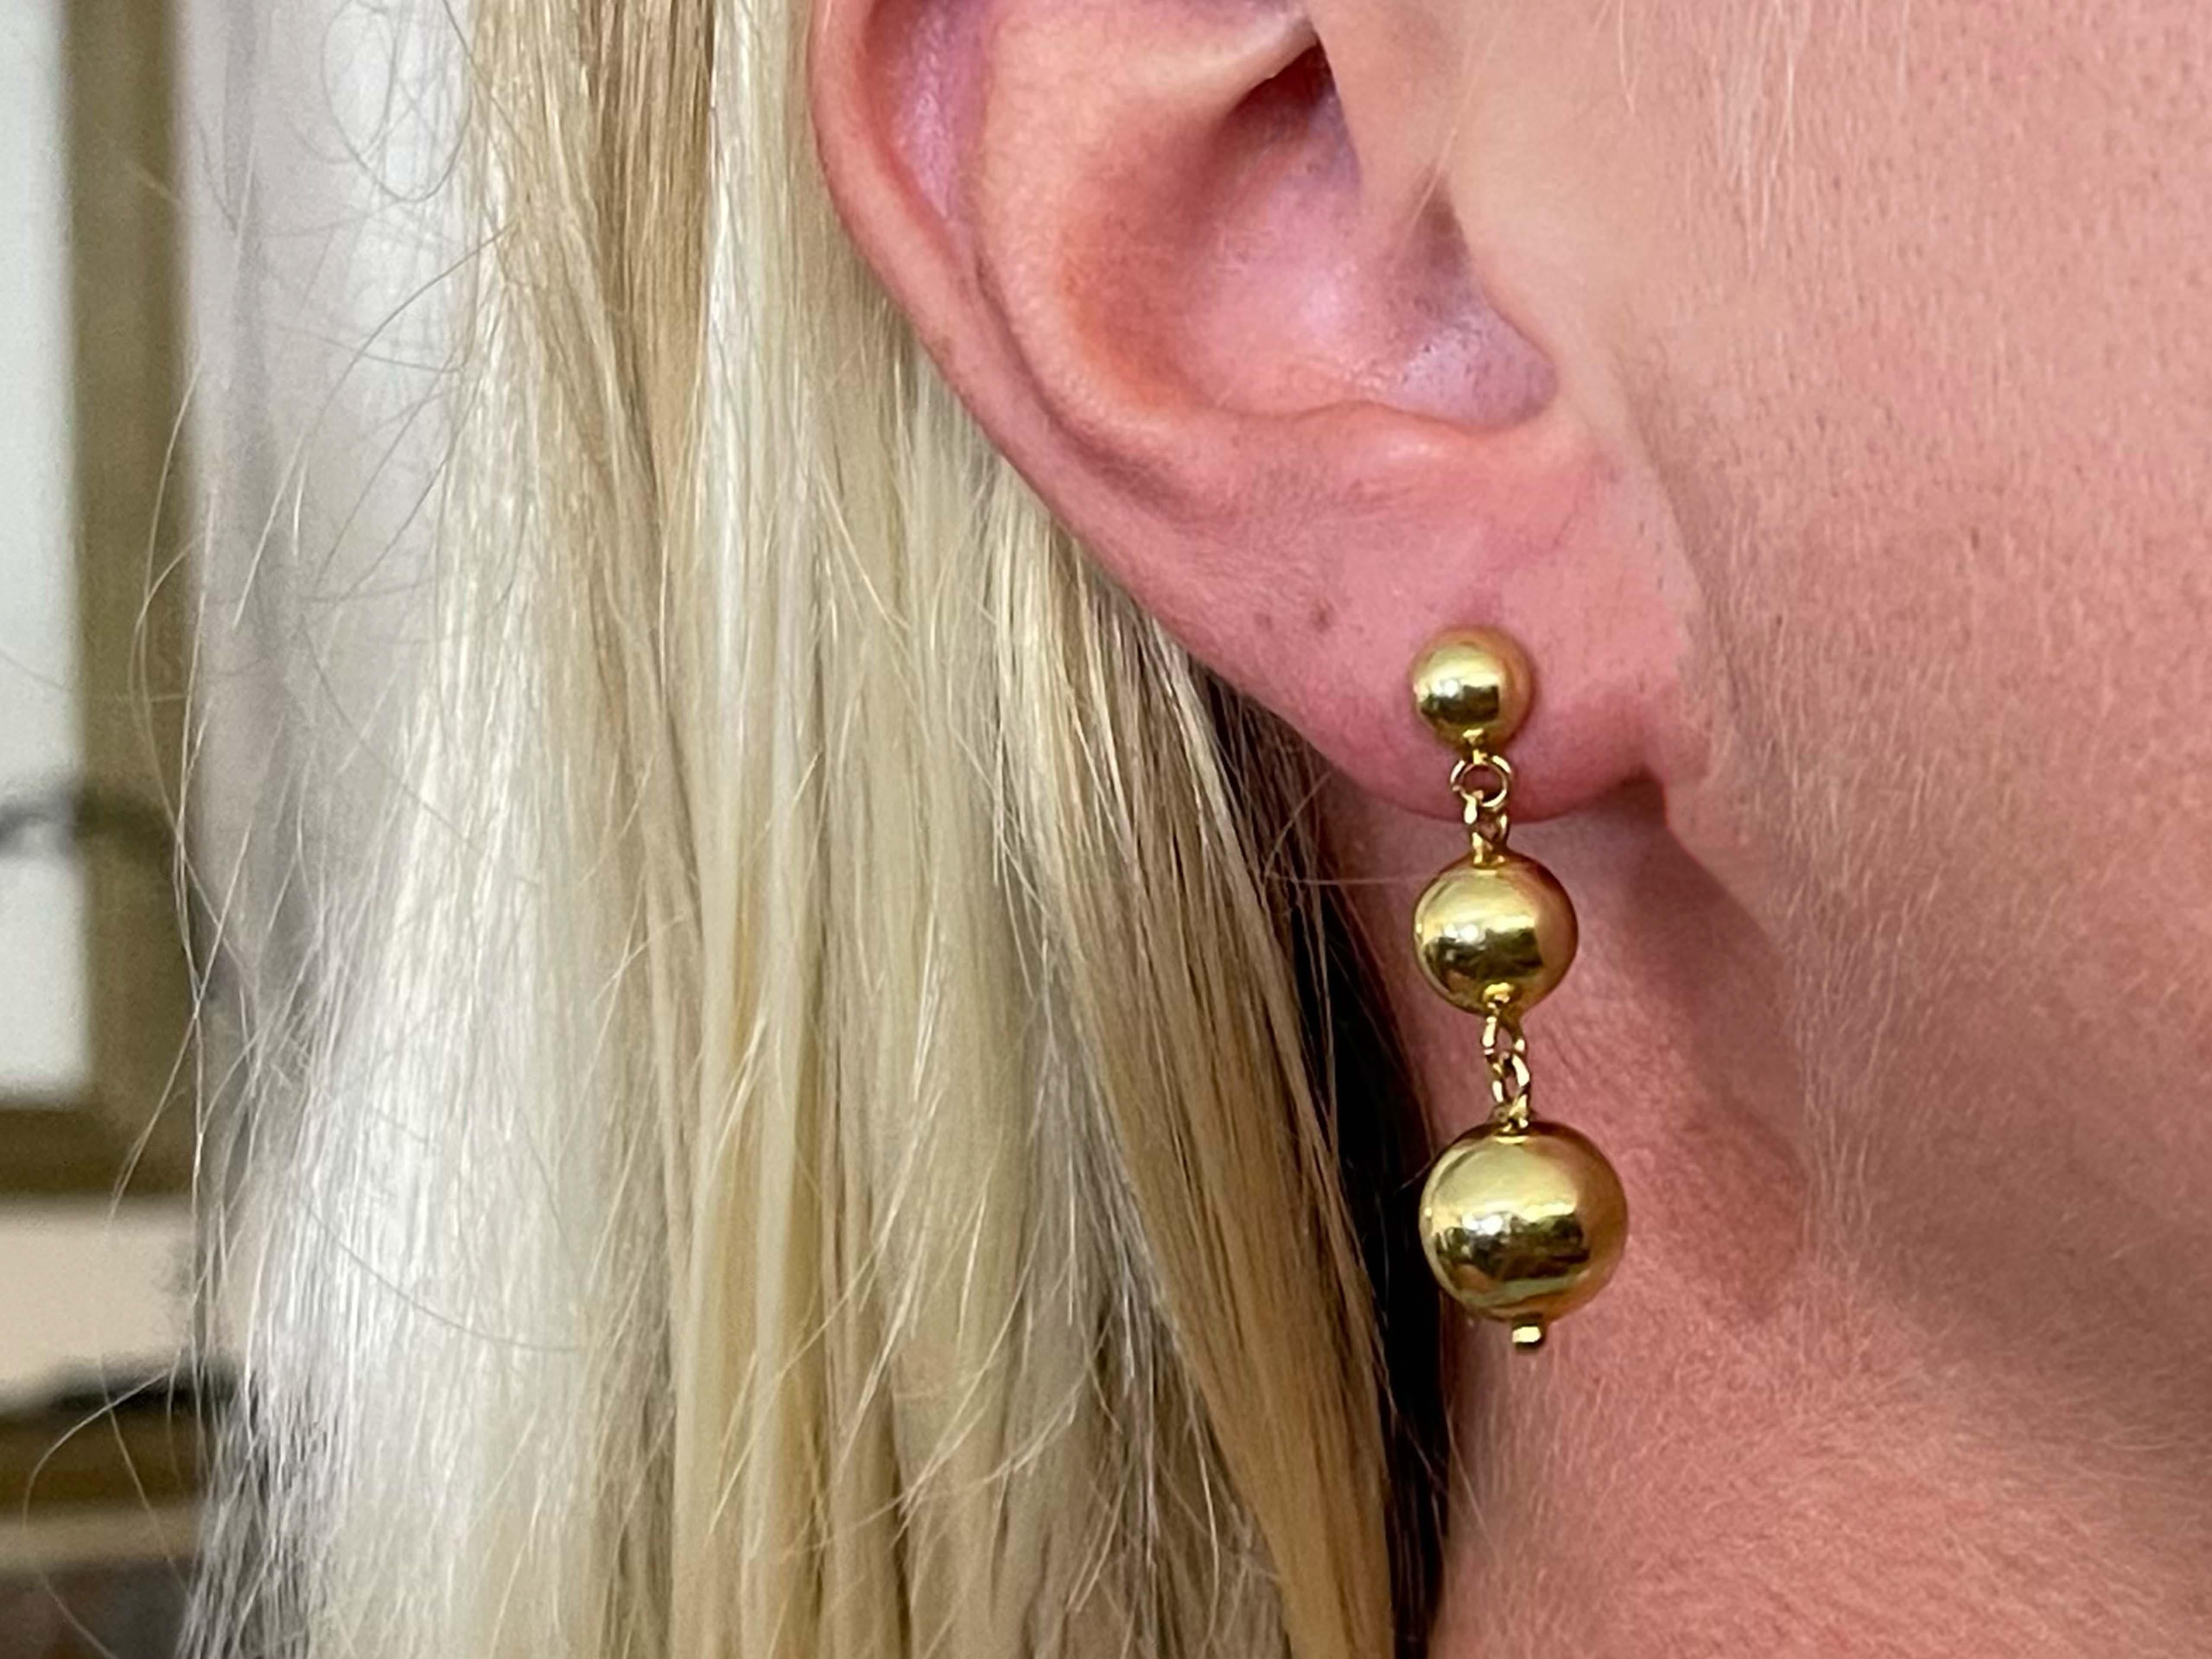 Earrings Specifications:

Metal: 18K Yellow Gold

Total Weight: 5.3 Grams

Stamped: 